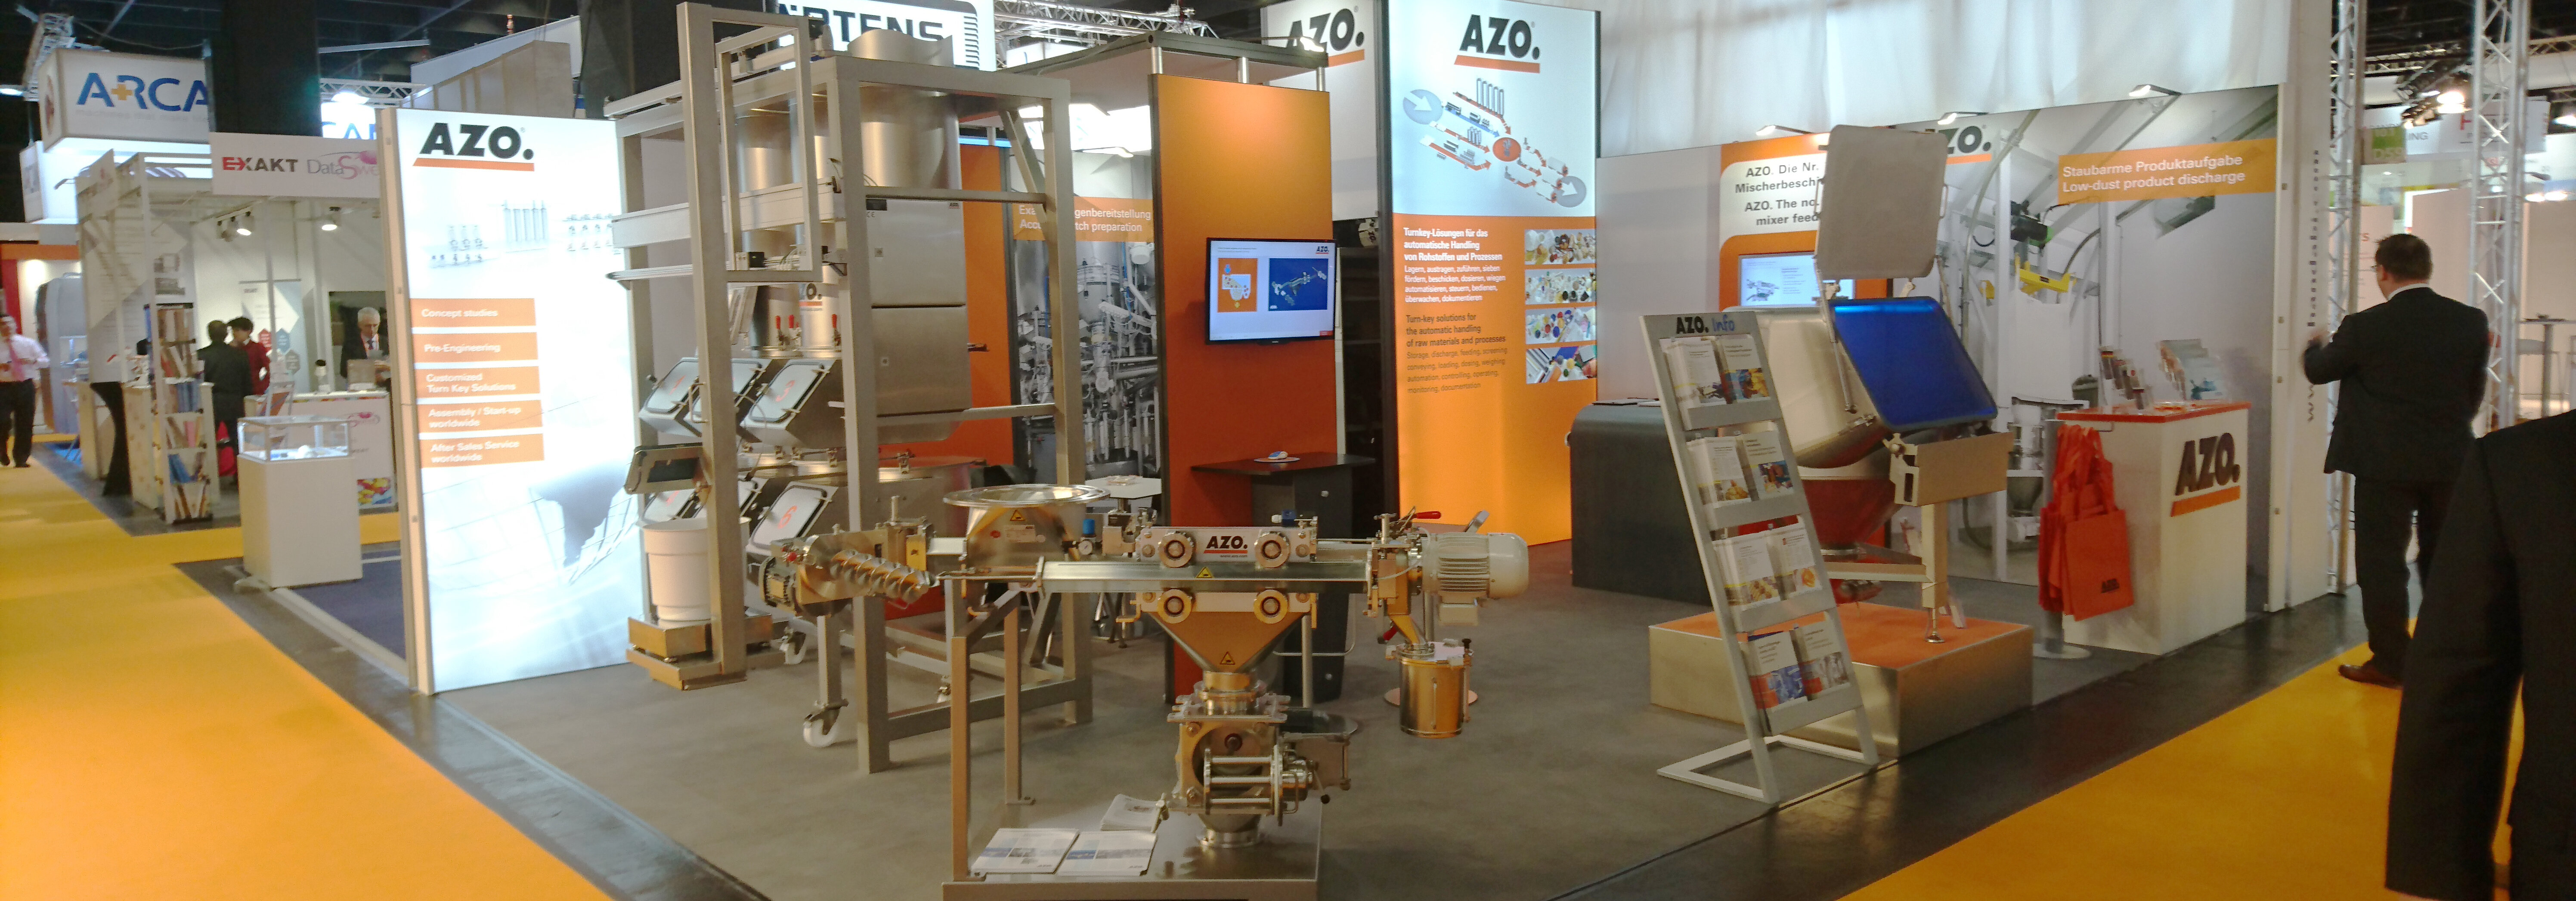 AZO booth at ProSweets 2019 hall 10.1, stand D059